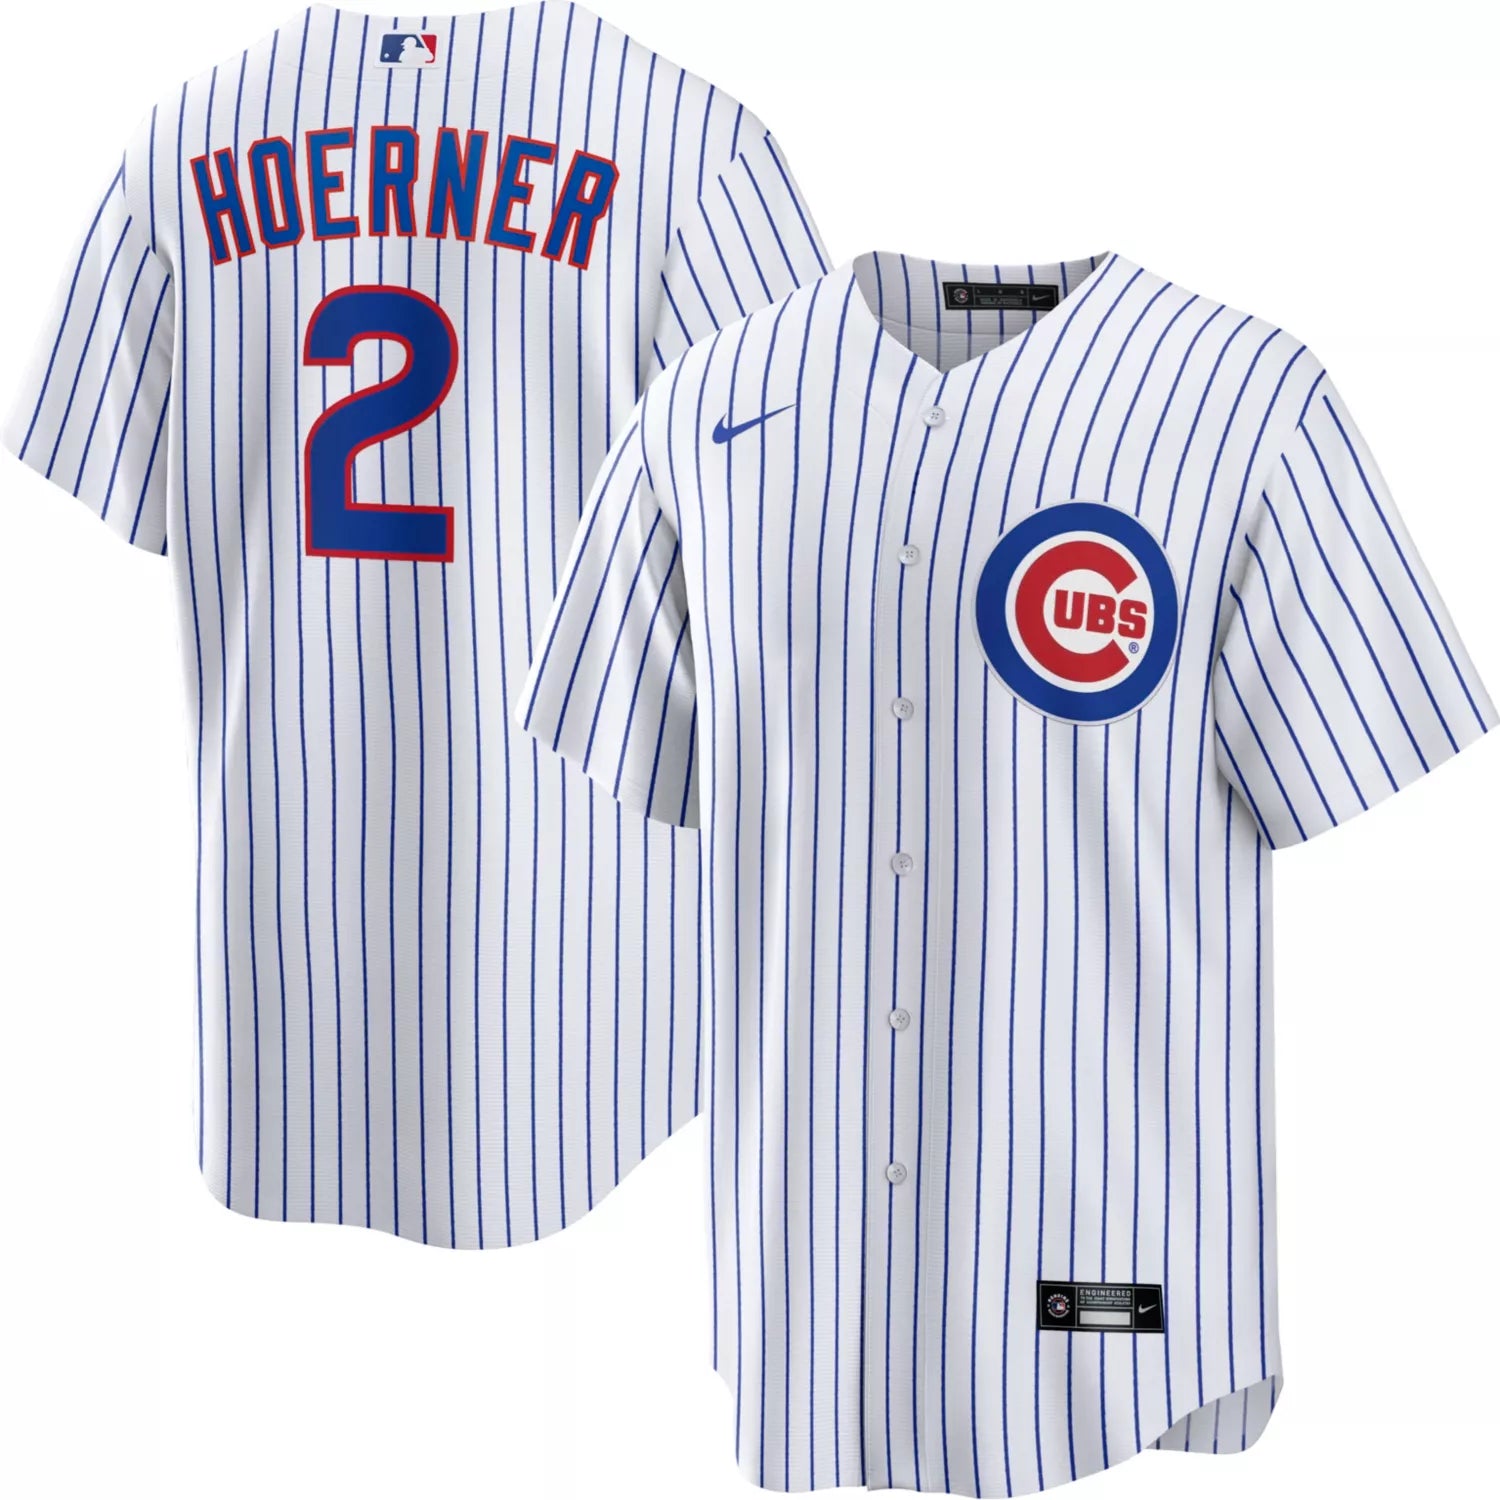 Nike Youth Nico Hoerner Chicago Cubs White Home Replica Jersey XL (18)